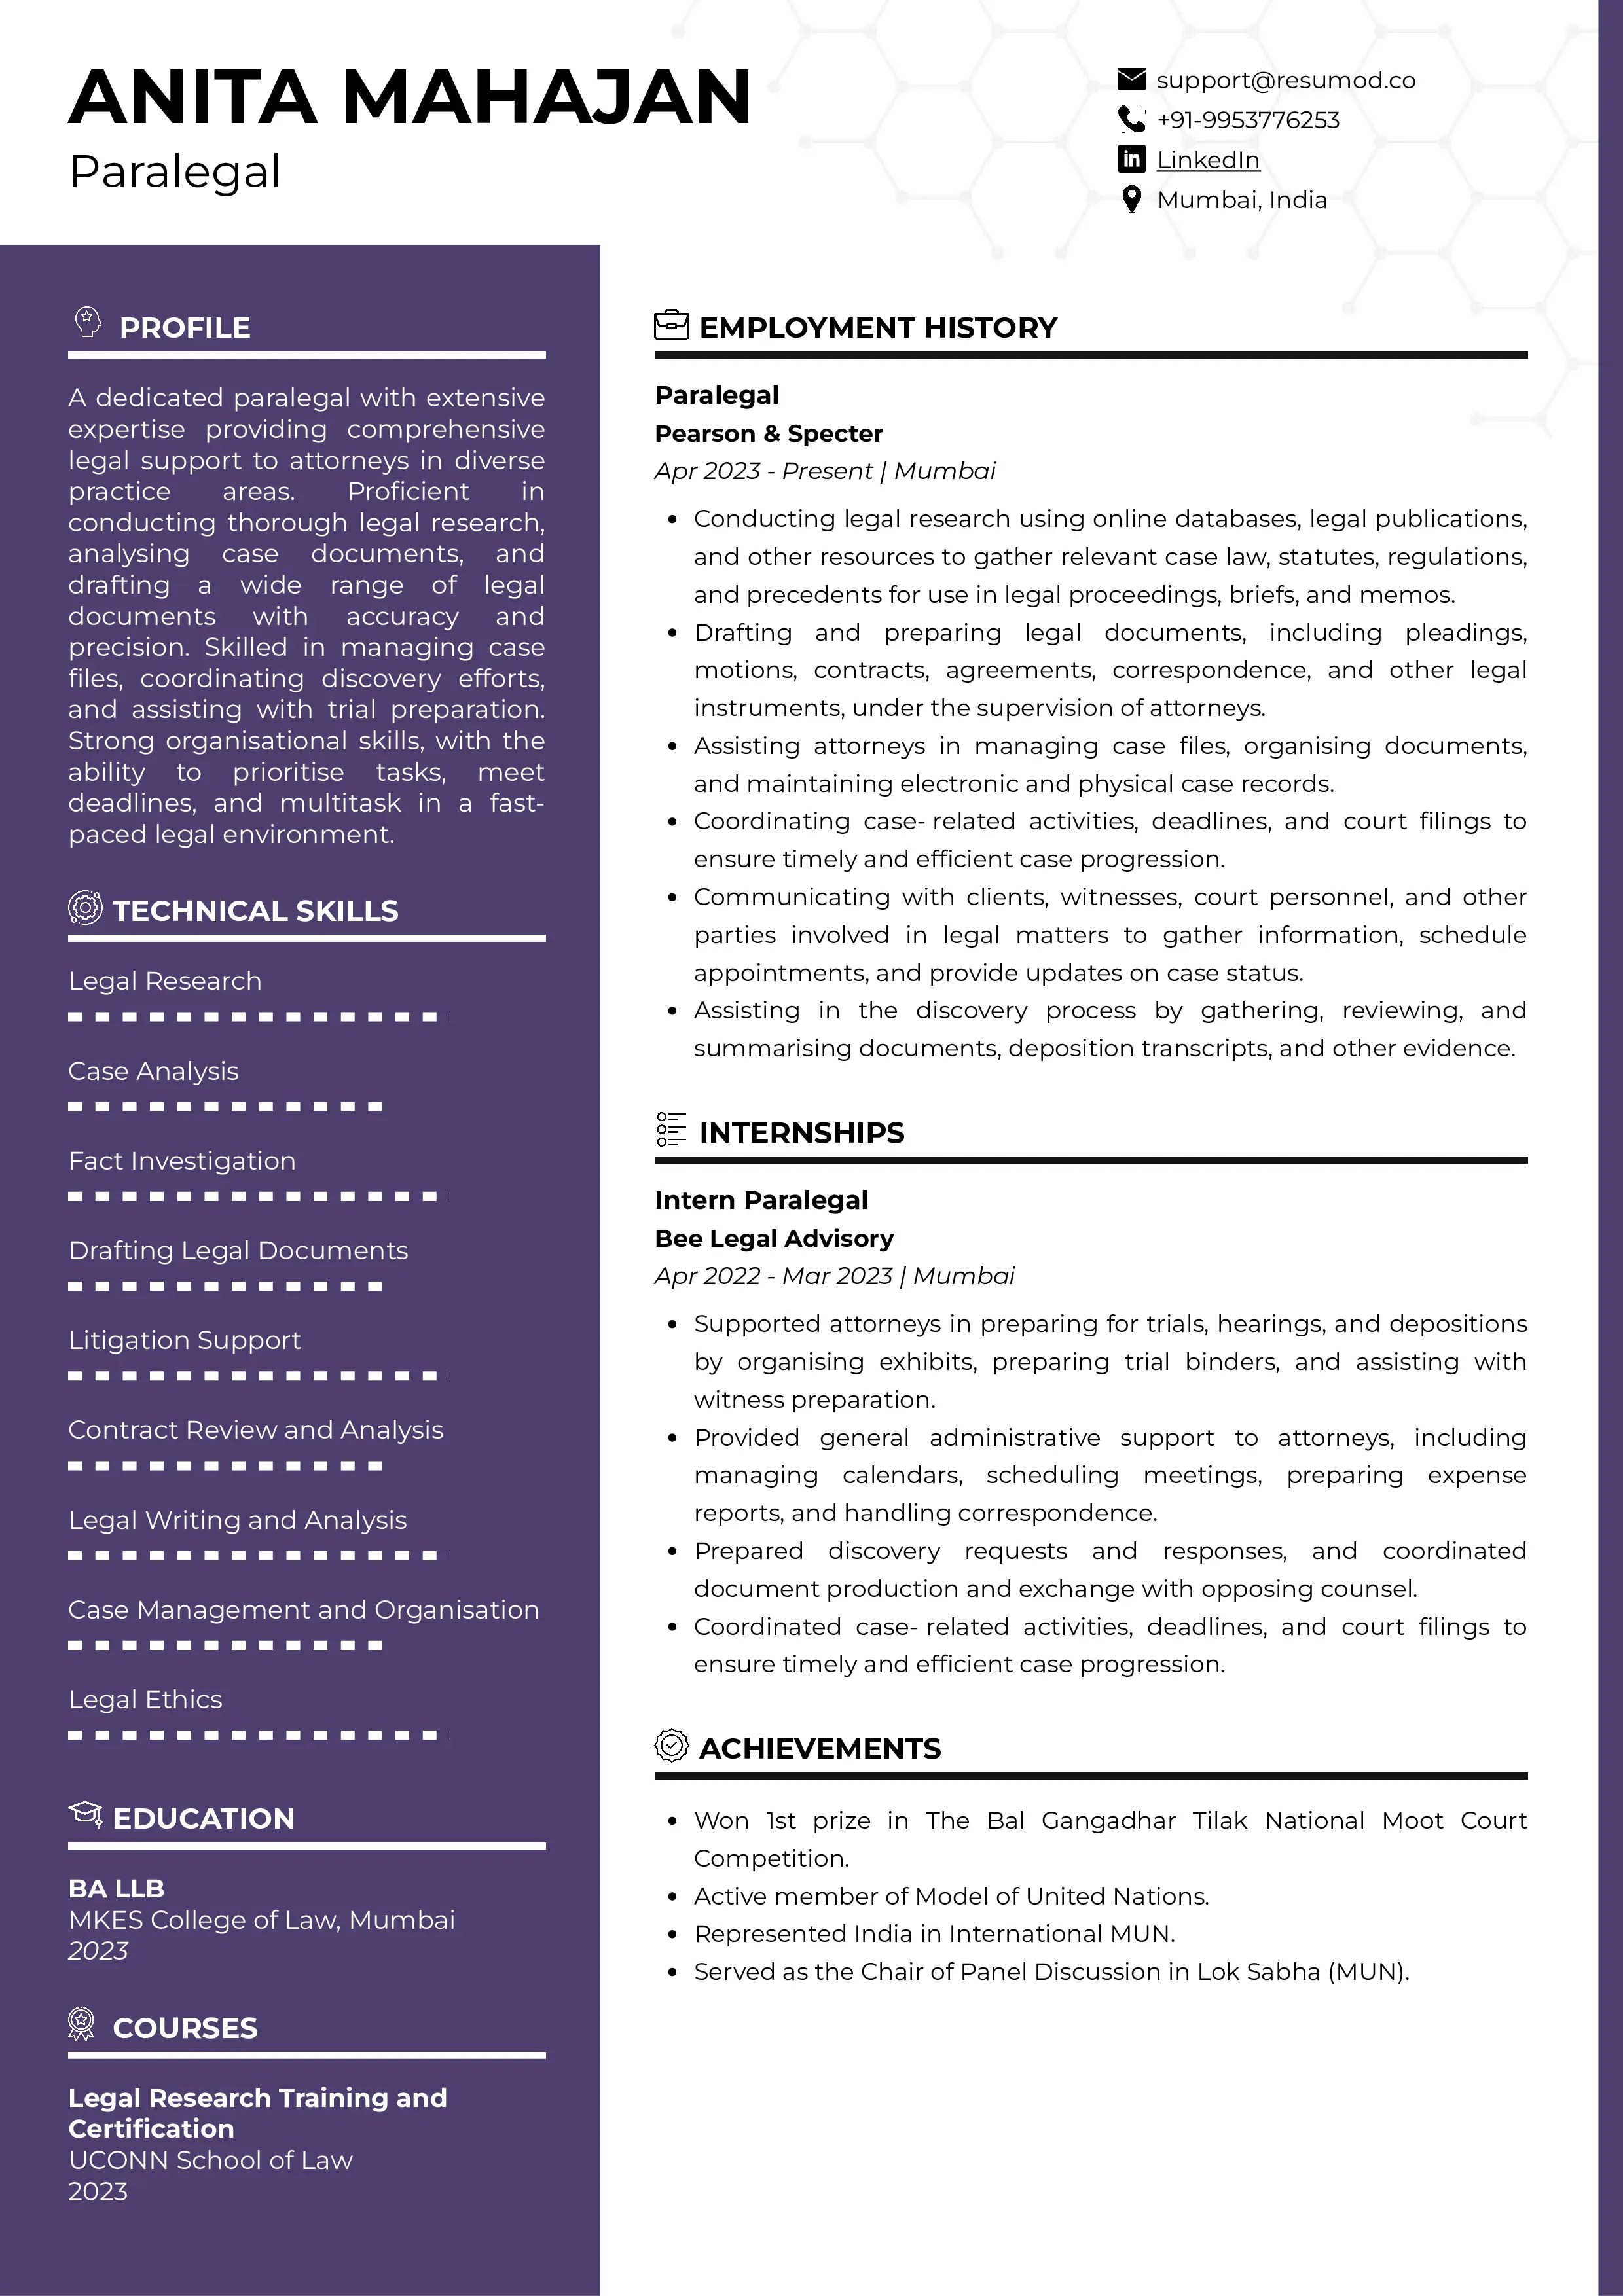 Sample Resume of Paralegal | Free Resume Templates & Samples on Resumod.co